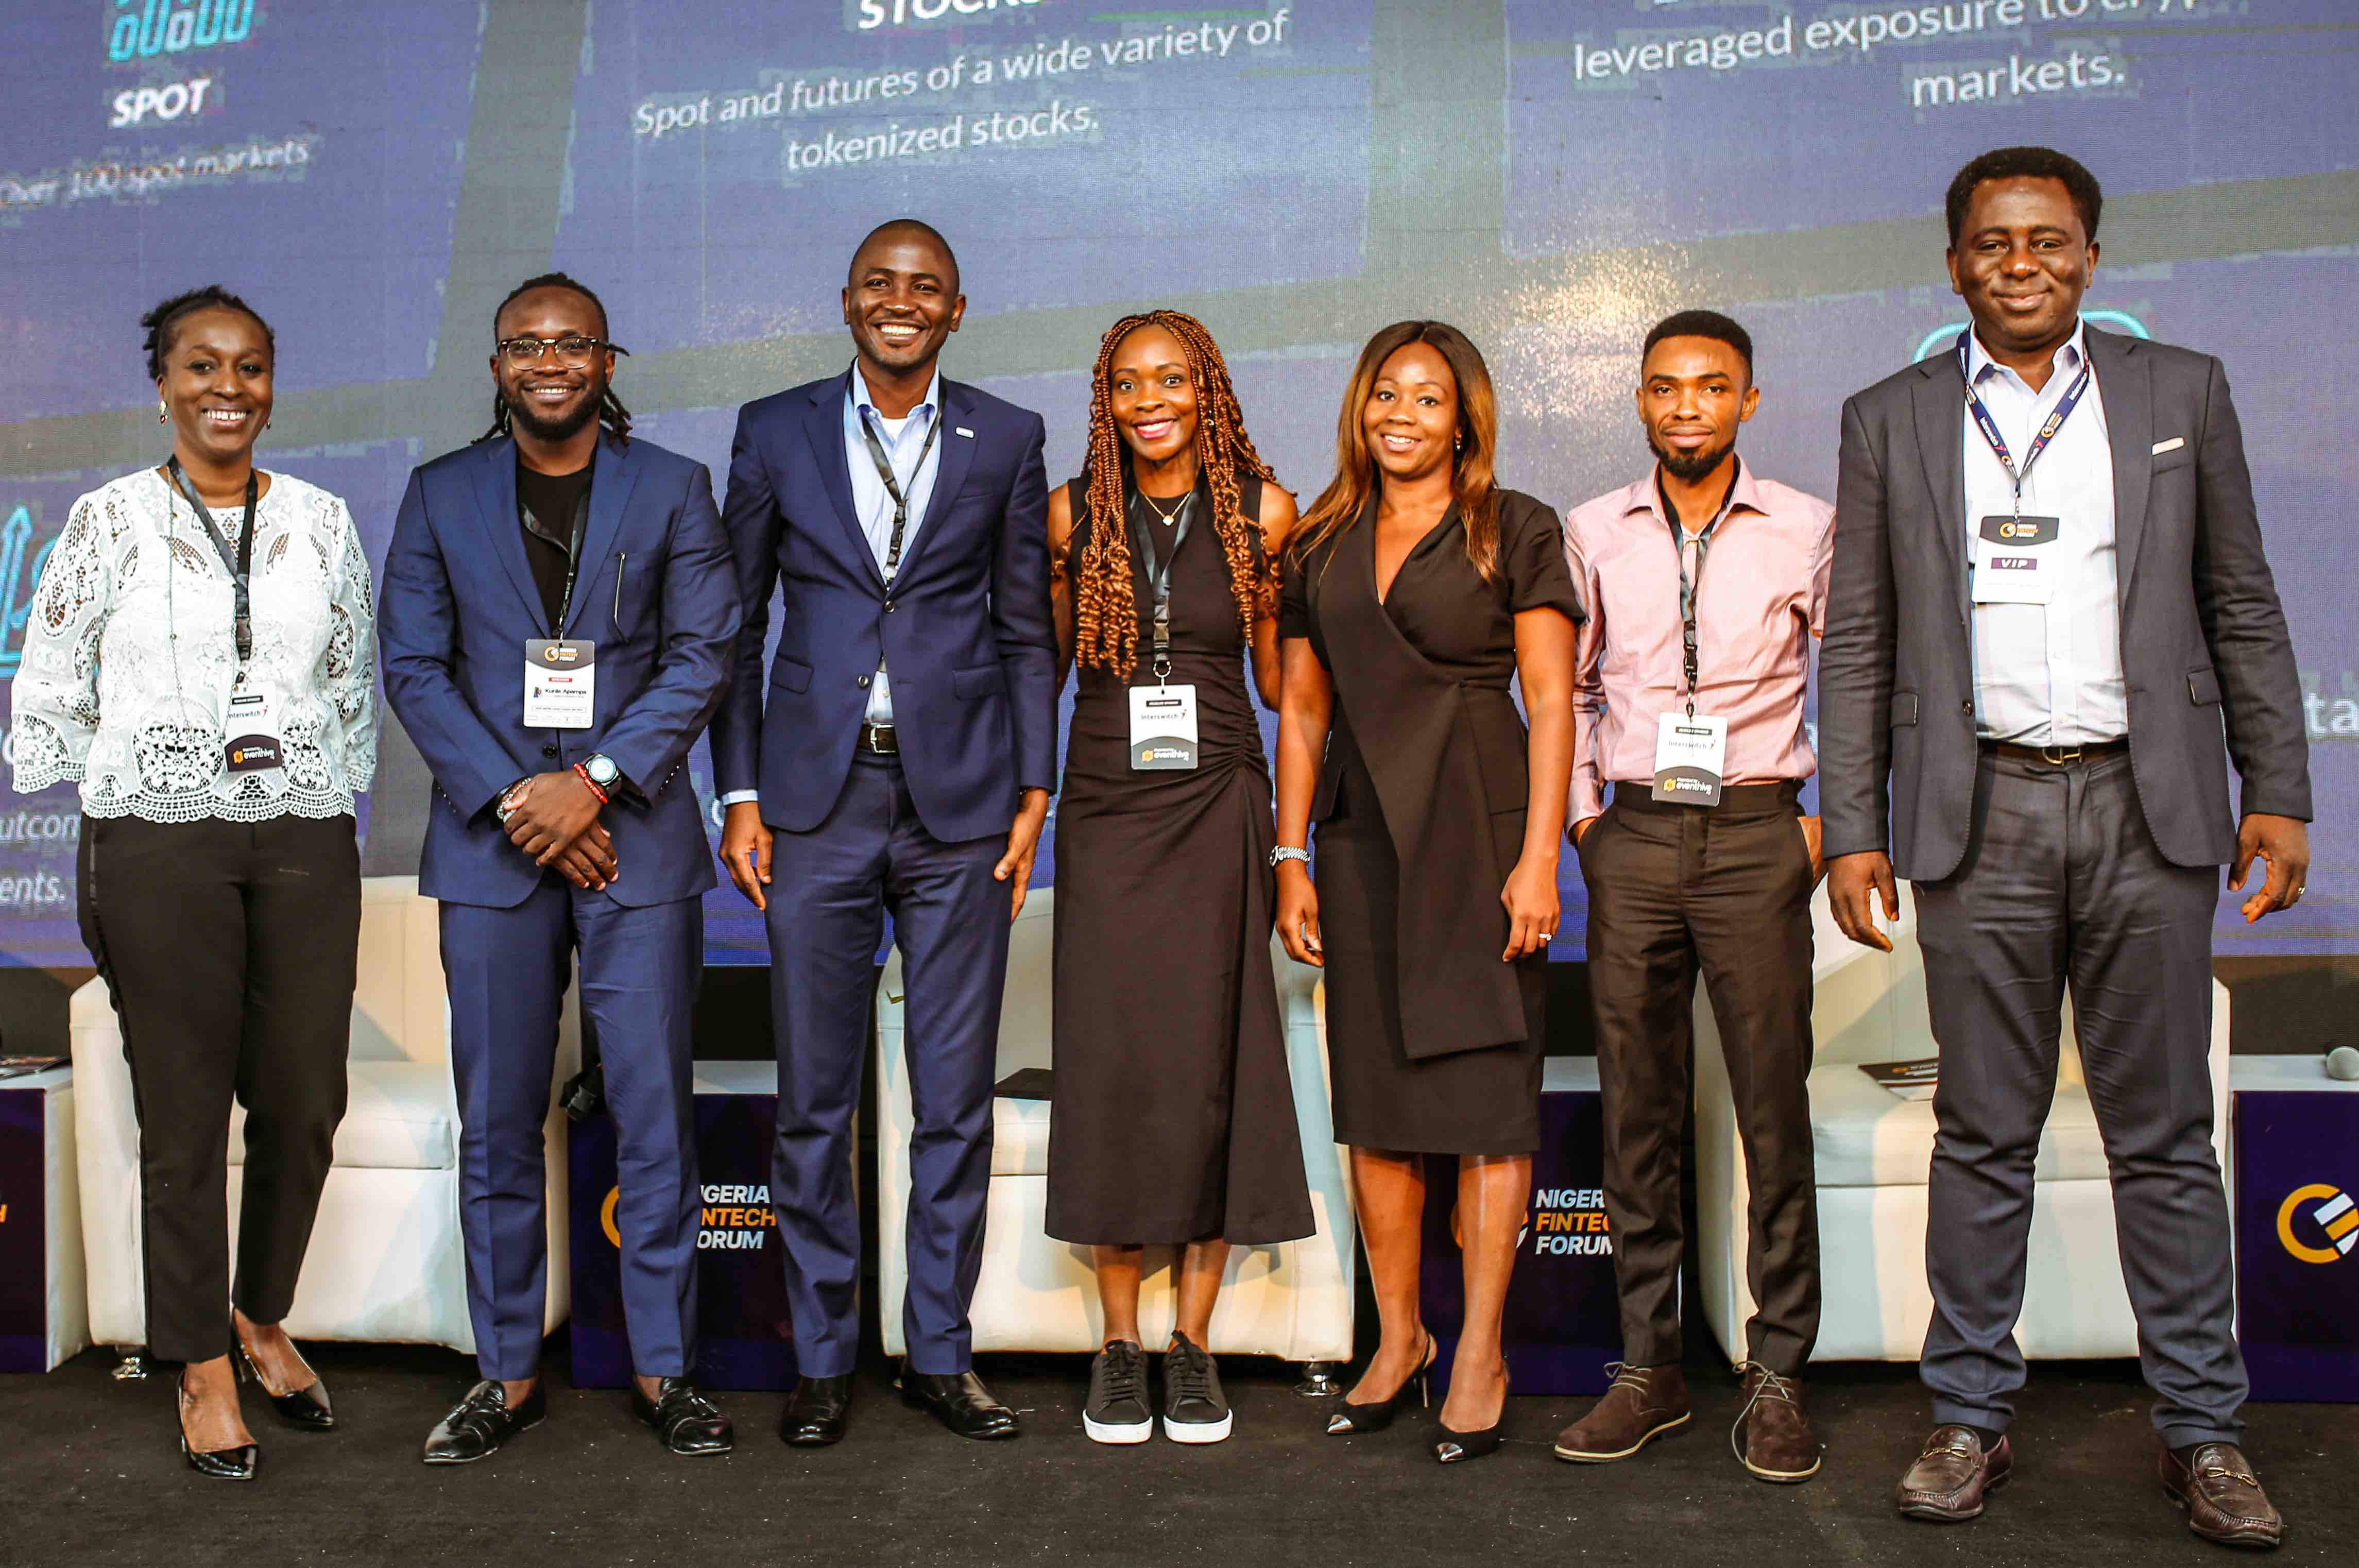 L-R: Yinka Edu of Udo Udoma & Belo-Osagie; Kunle Apampa of Capricorn Investment; Dr Babatunde Obrimah of Fintech Association of Nigeria; Aderonke Alex-Adedipe of Pavestones; Tobi Olusoga of I-invest; Tolu Adetuyi of Identity Pass and Jonah Adams of Interswitch at the just concluded Nigeria Fintech Forum at the Civic Center, Lagos.